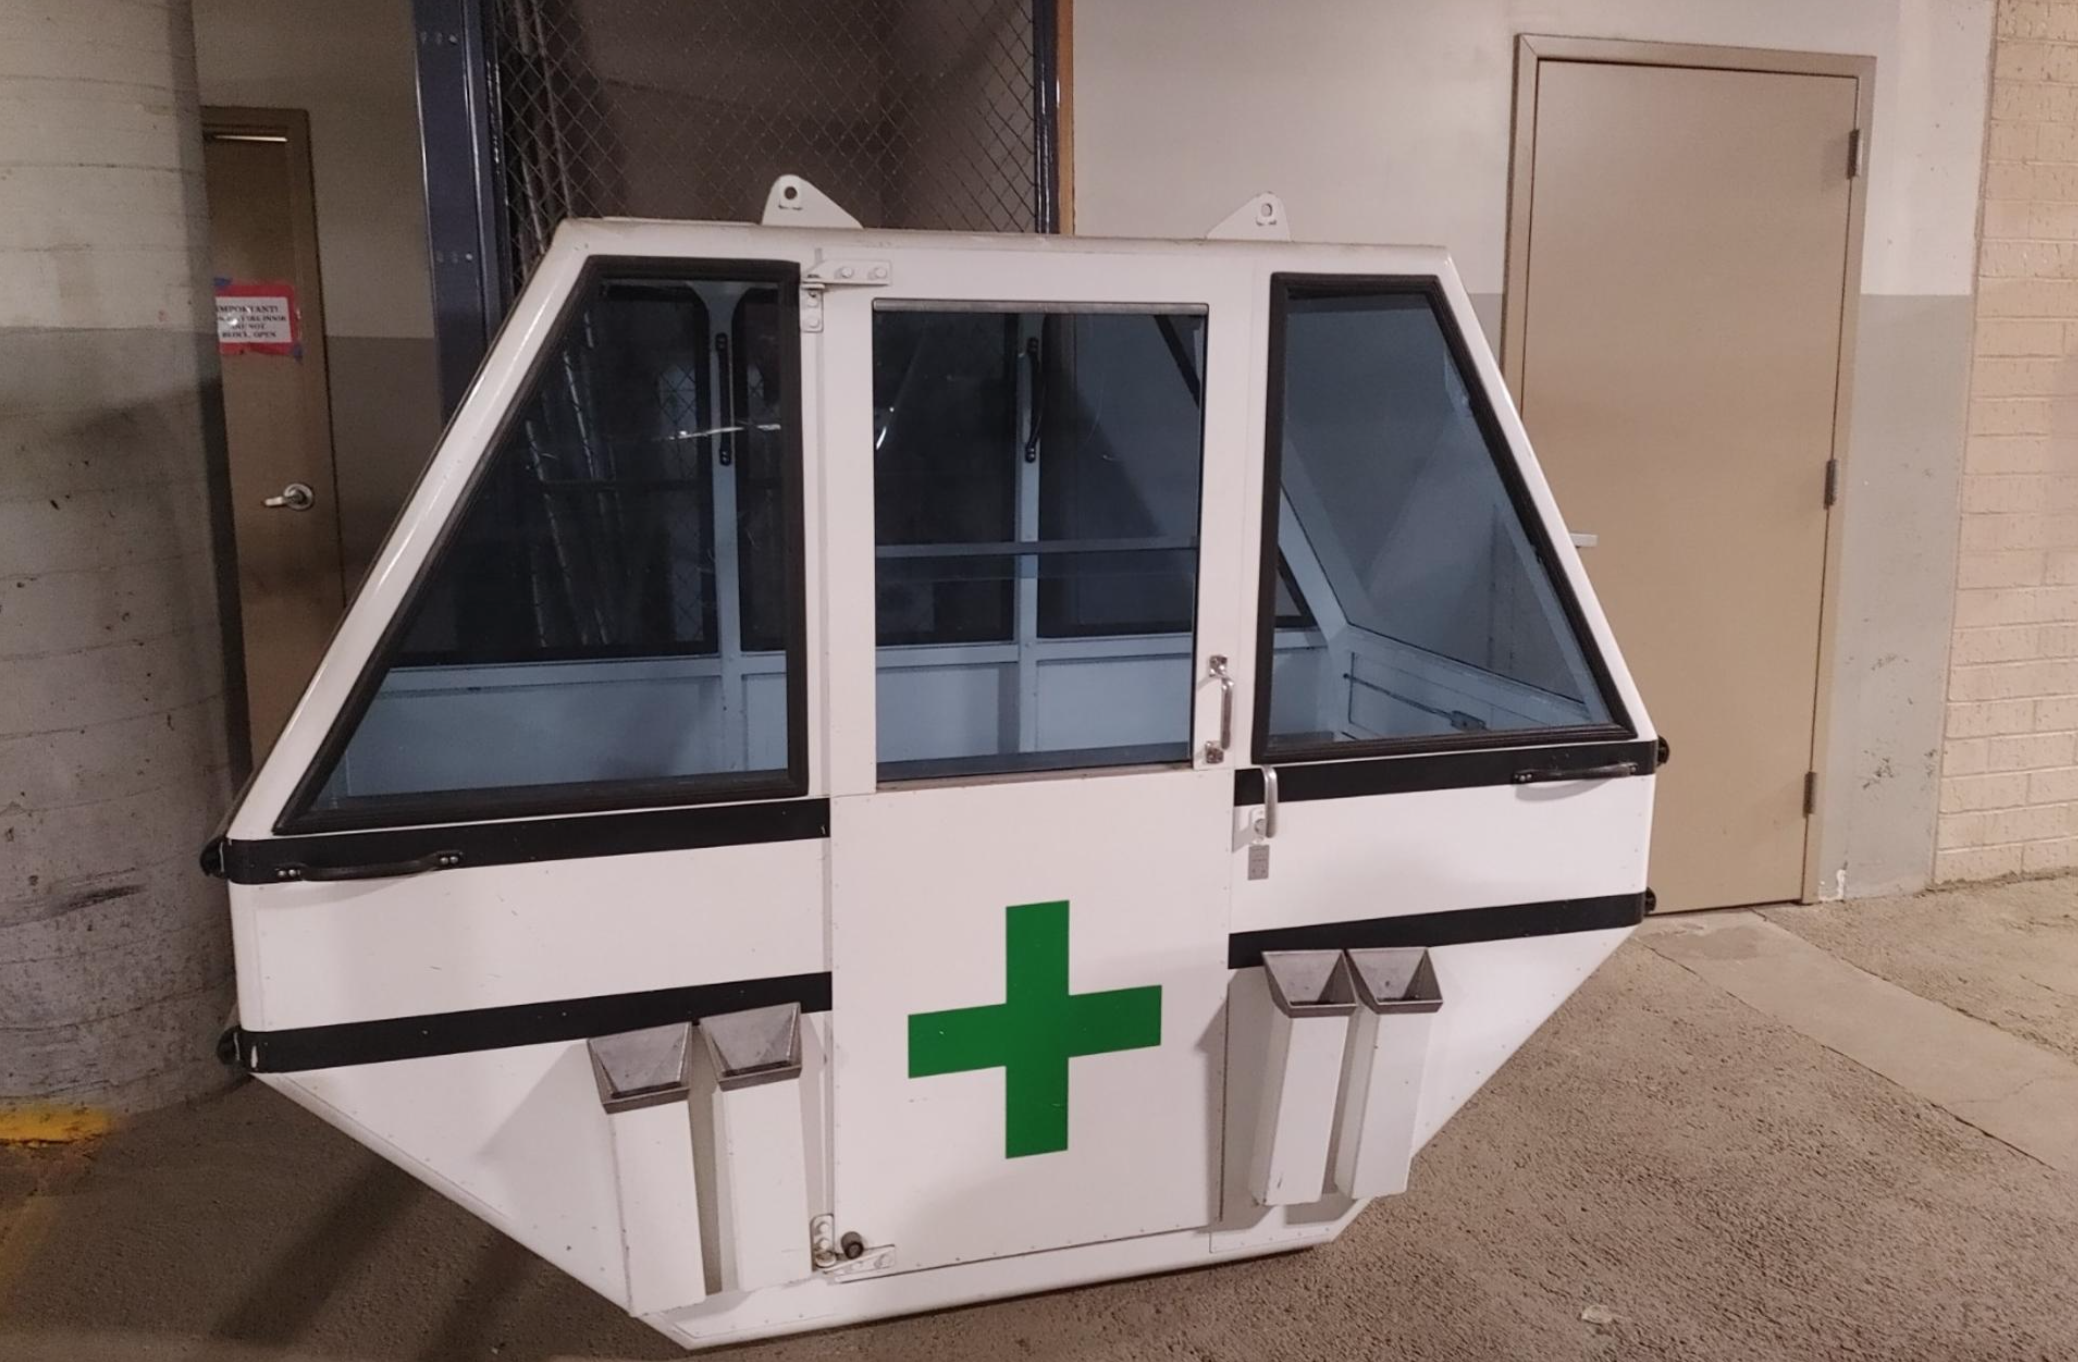 Steamboat Auctioning Off Rare Medical Gondola As Part of Fundraiser (Opening Bid $5,000)